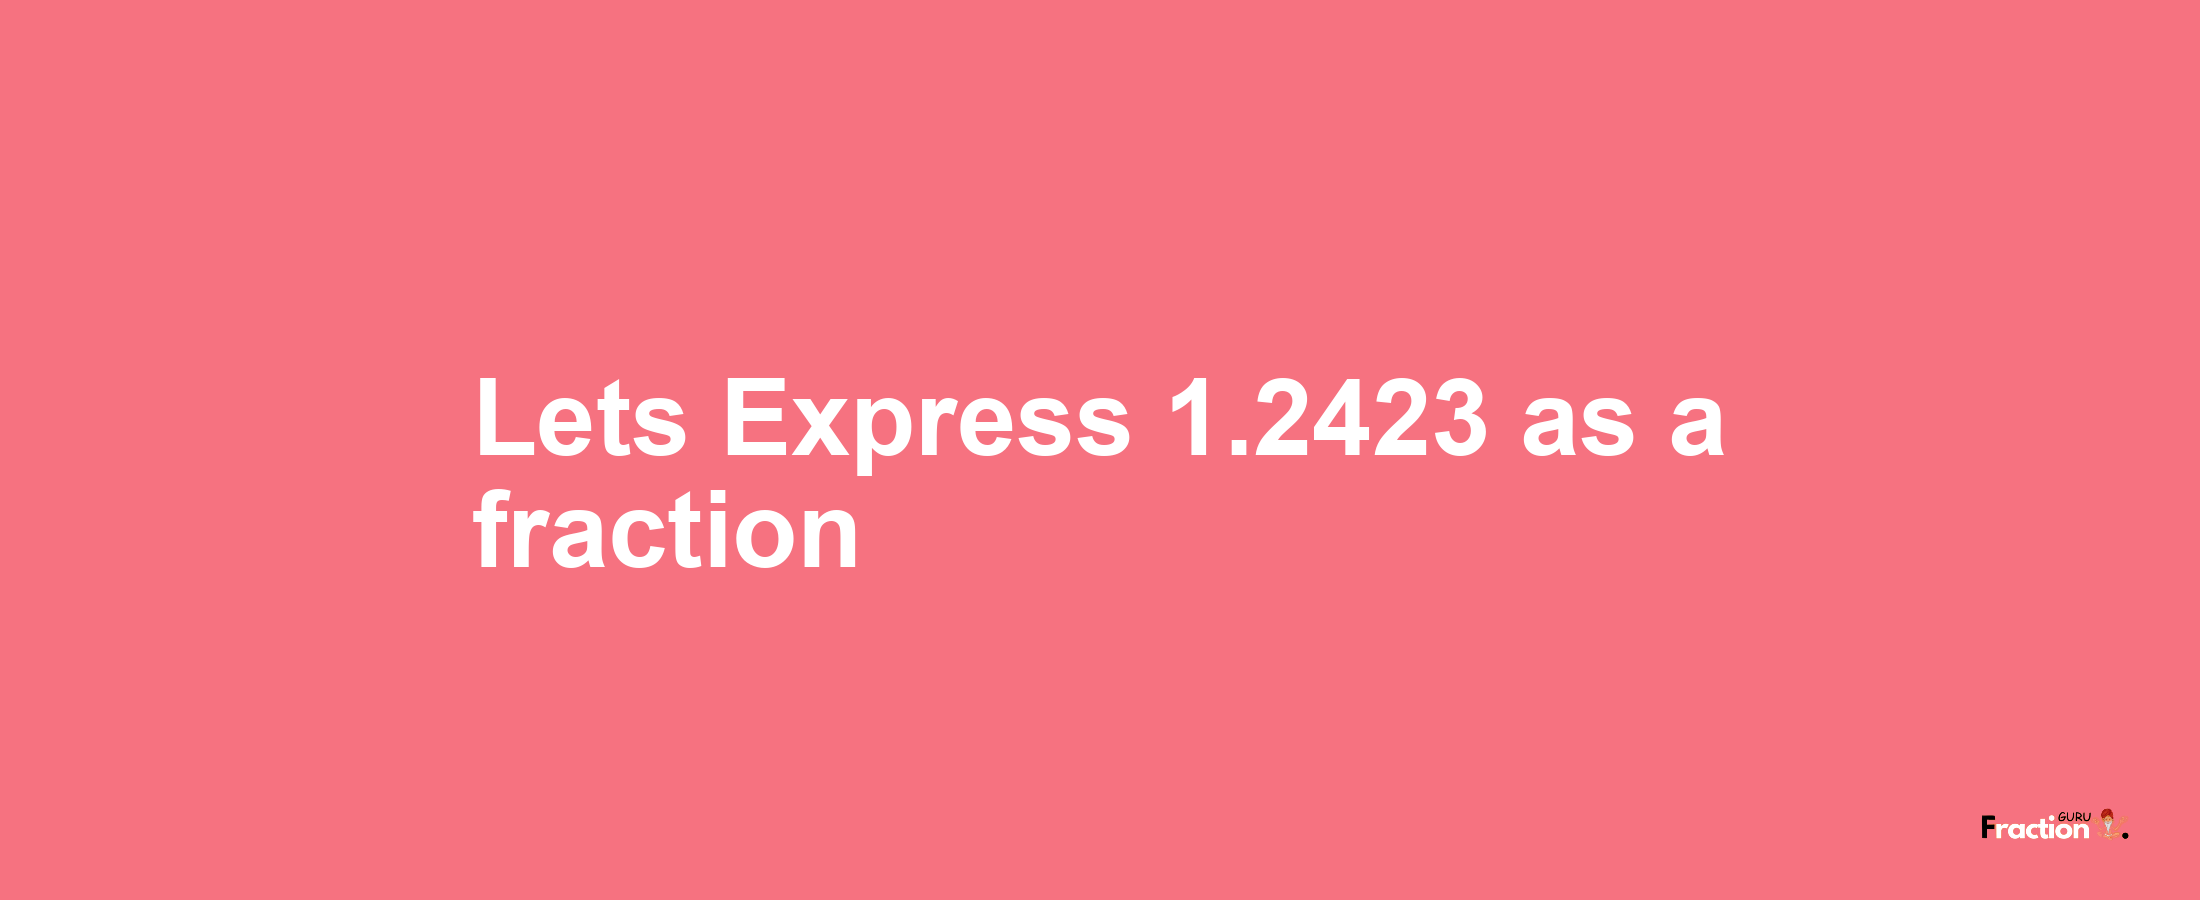 Lets Express 1.2423 as afraction